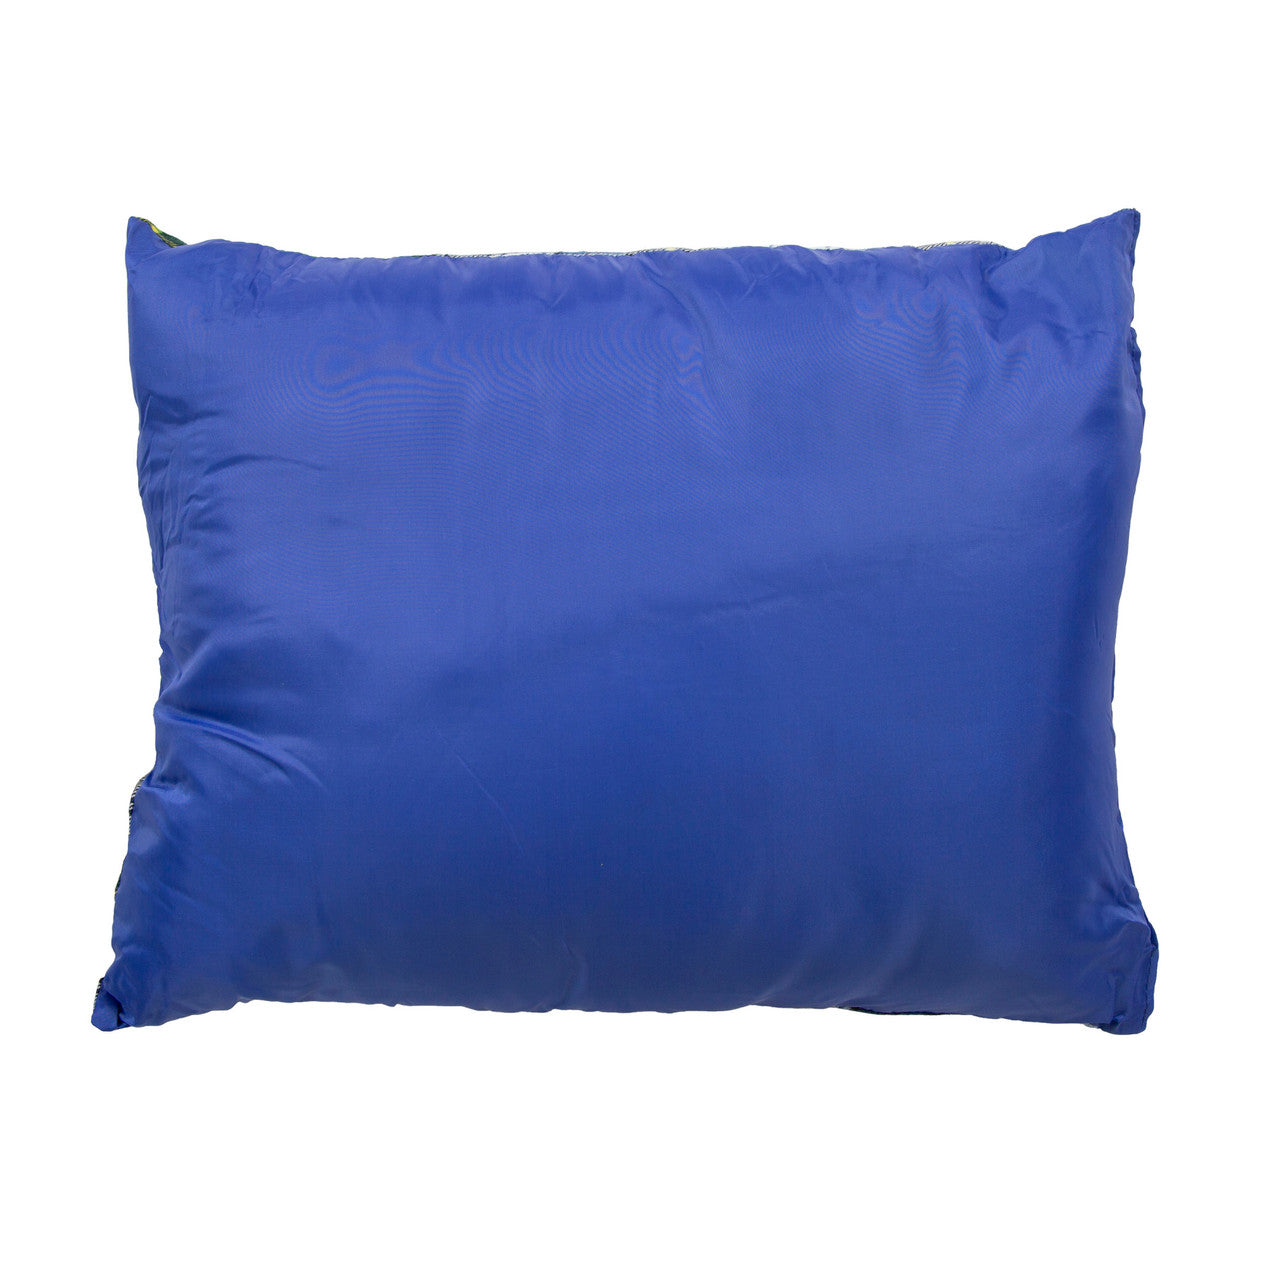 Washable Camp Pillow